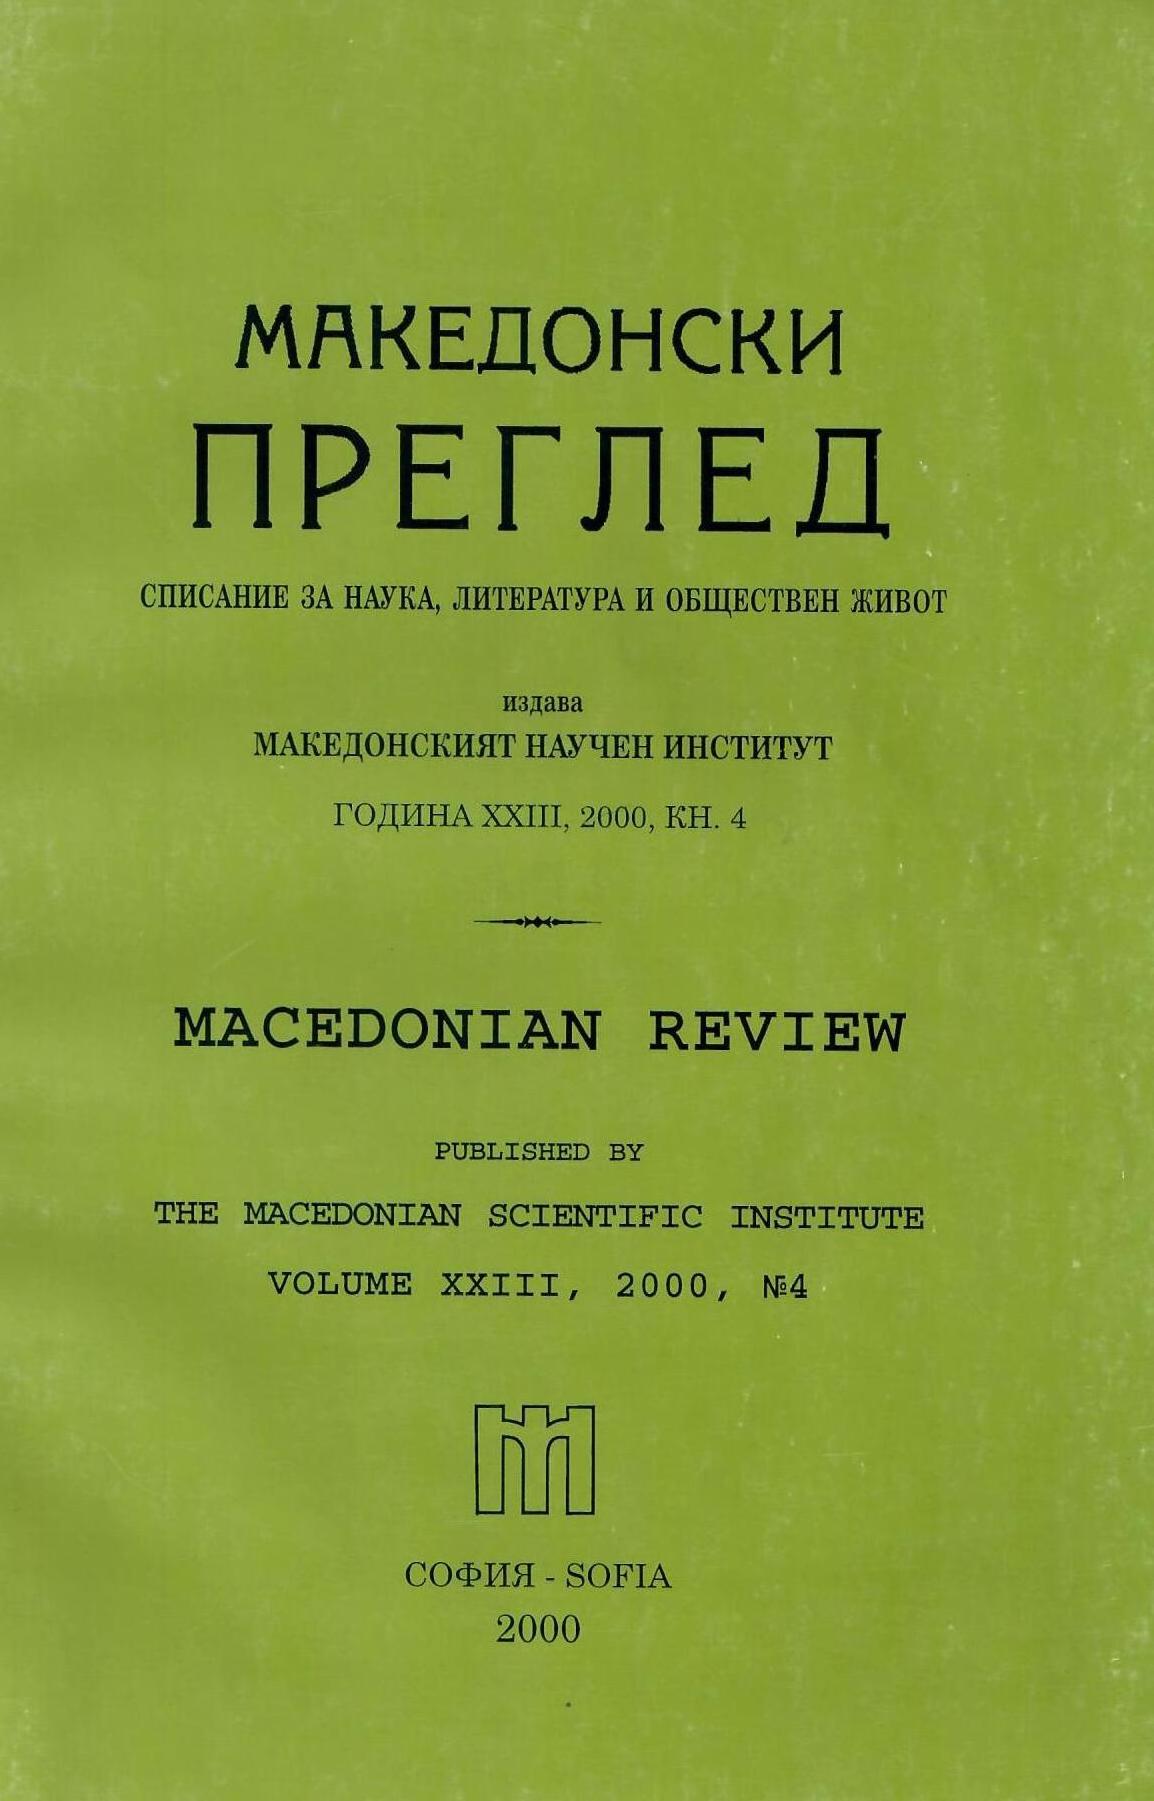 An Interesting book for the Bosilegrad region Cover Image